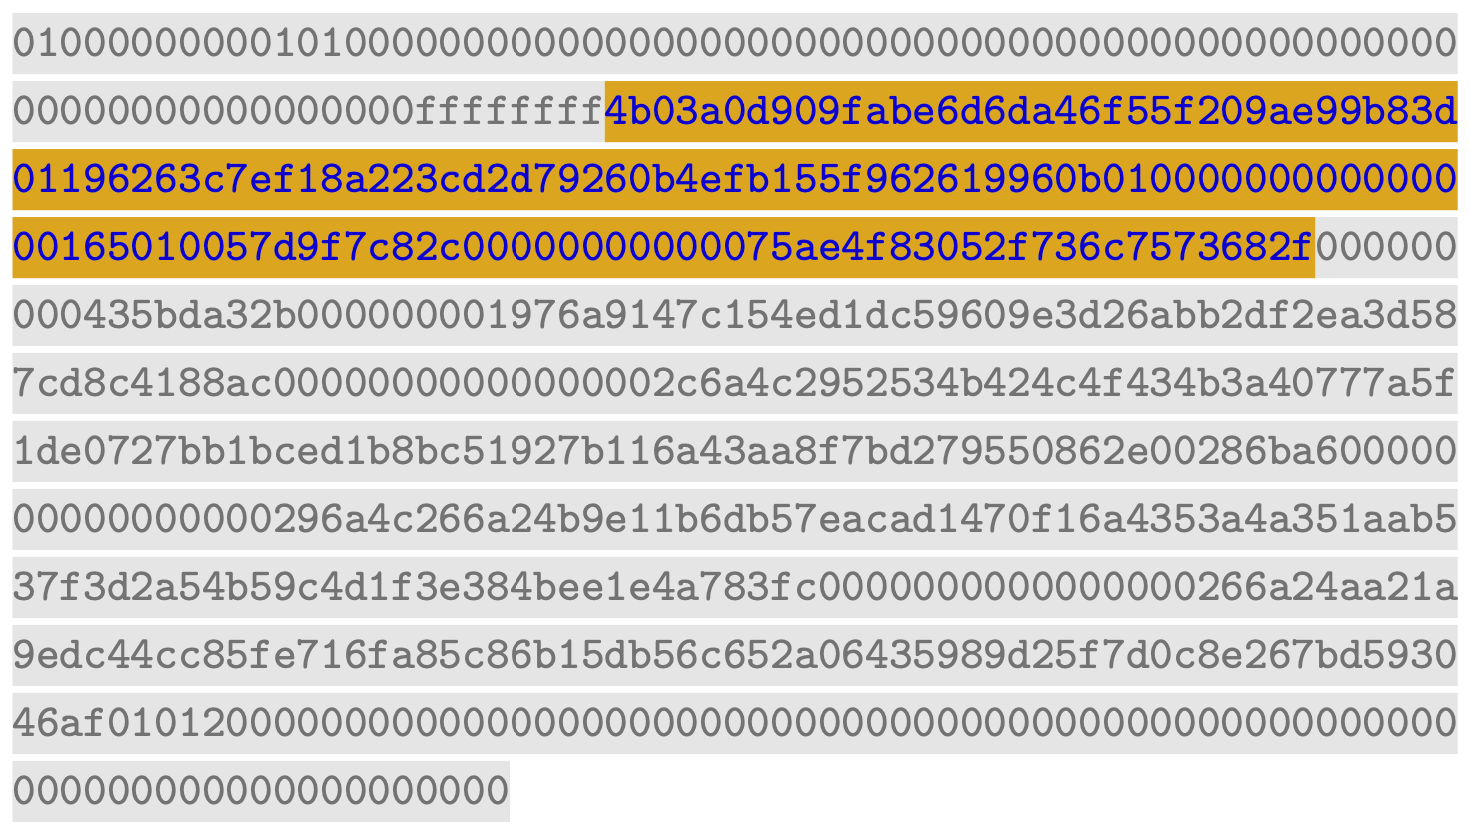 Script Signature in the Coinbase Transaction of Block at Height 645,536